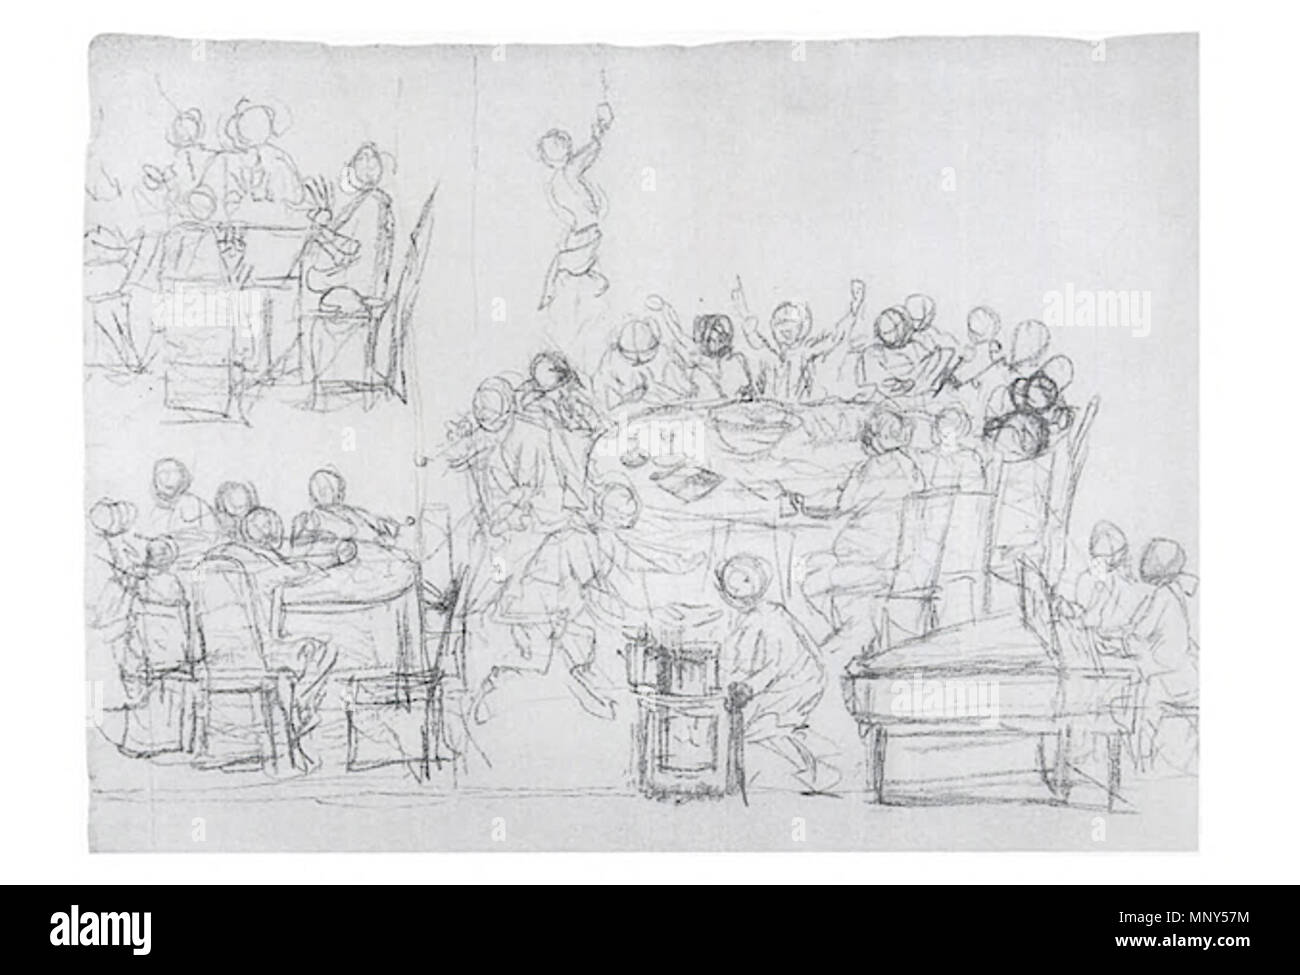 . English: A Sketch or View of the Company [Rose and Crown Club] as are Together when they Celebrate there Kalendae or Mounthly Computations. Original sketch is in red chalk. circa 1724. George Vertue 1231 Vertue Rose and Crown sketch Stock Photo